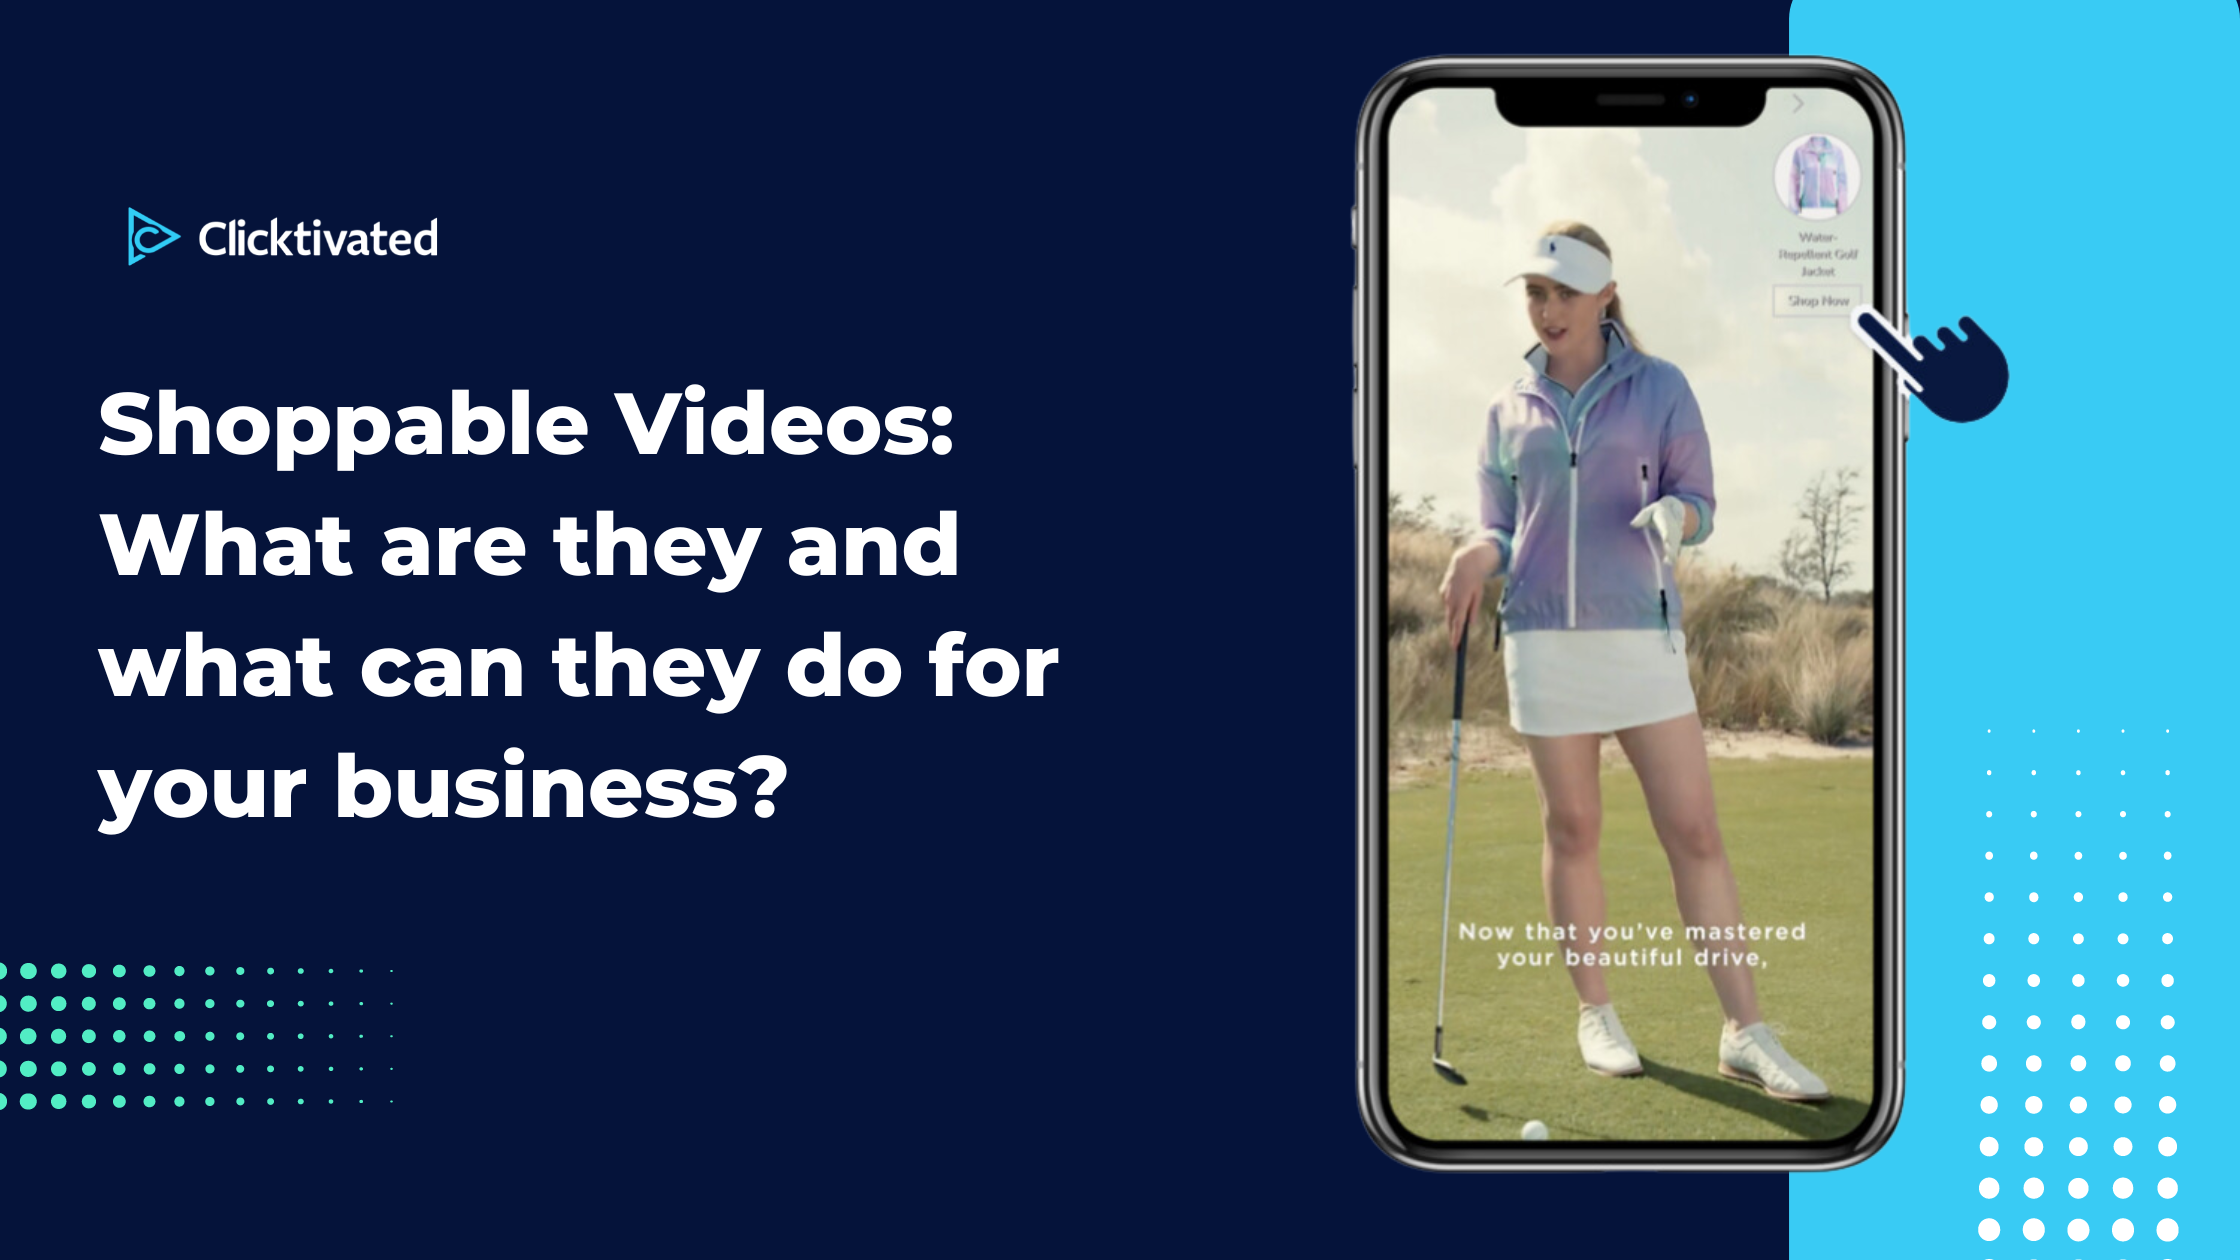 Shoppable Videos: What are they and what can they do for your business?